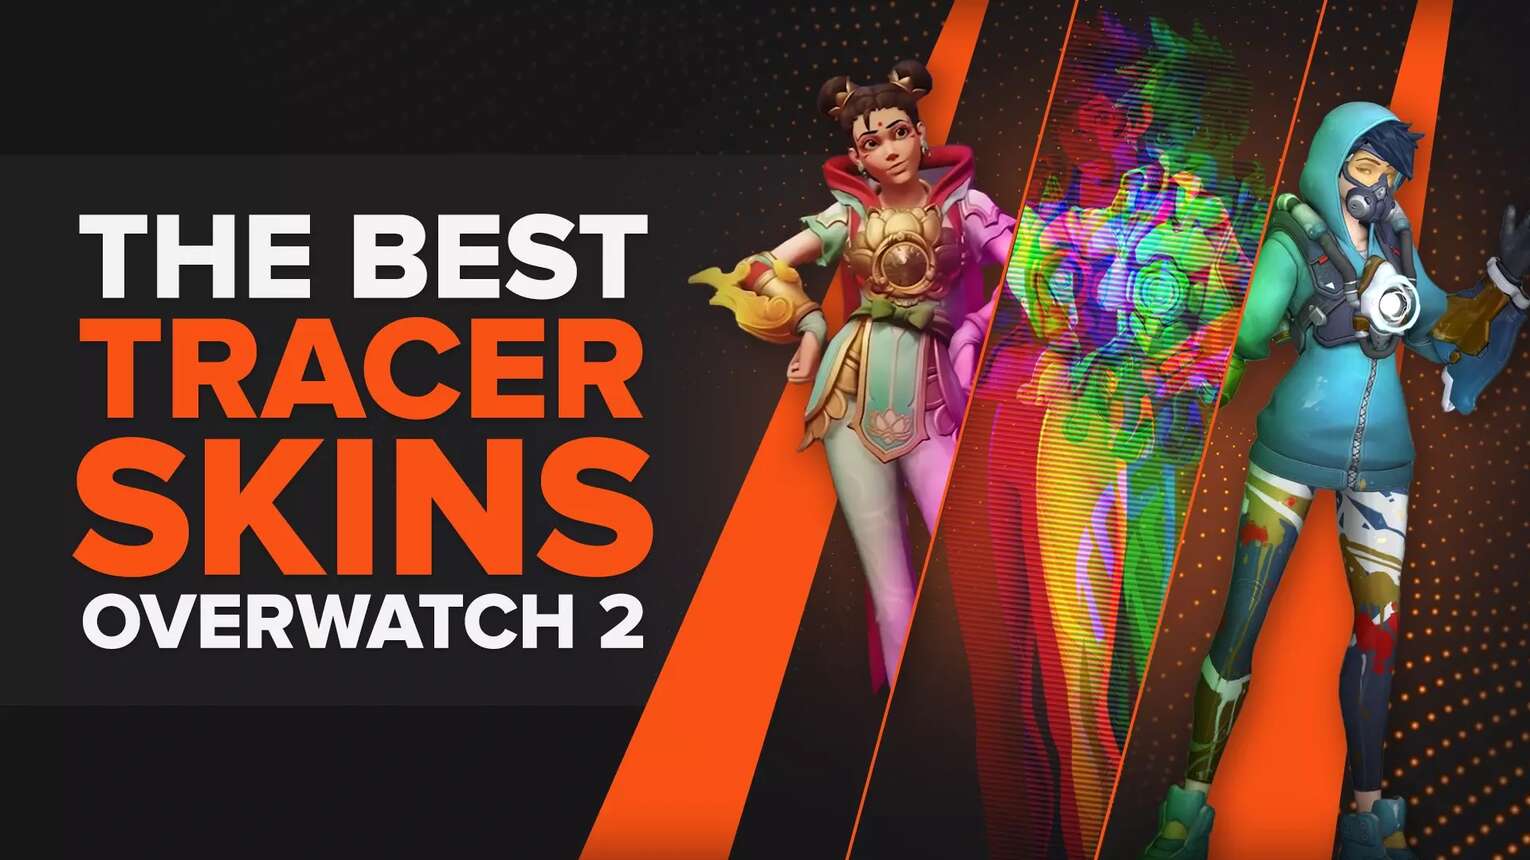 6 Best Tracer Skins Overwatch 2 That Are Simply Fire